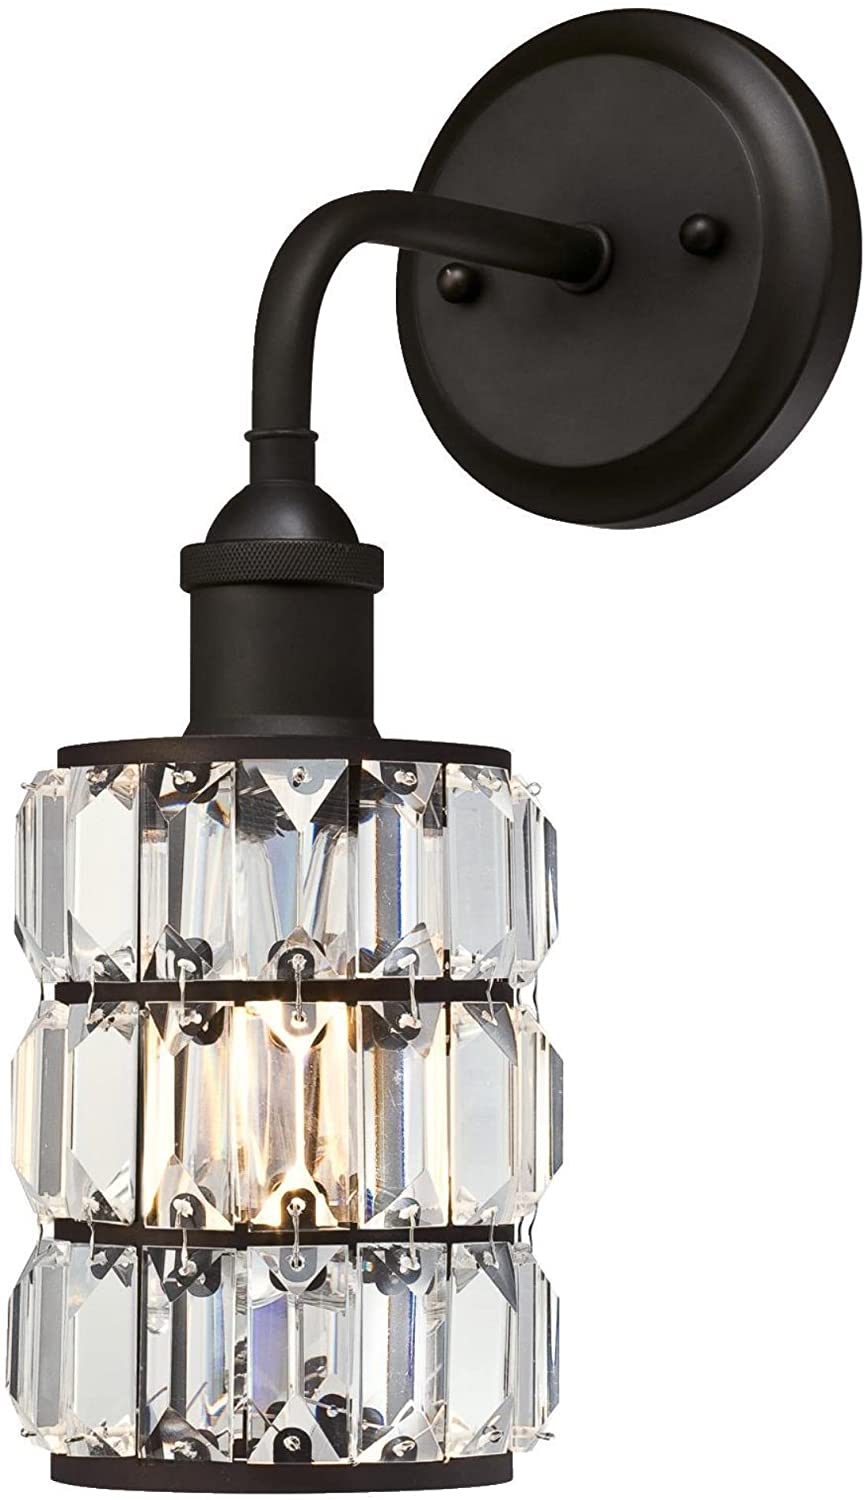 Westinghouse Lighting 6337500 Sophie One-Light Indoor Wall Fixture, Oil Rubbed Bronze Finish with Crystal Prism Glass KB2388-A6-B3-P2